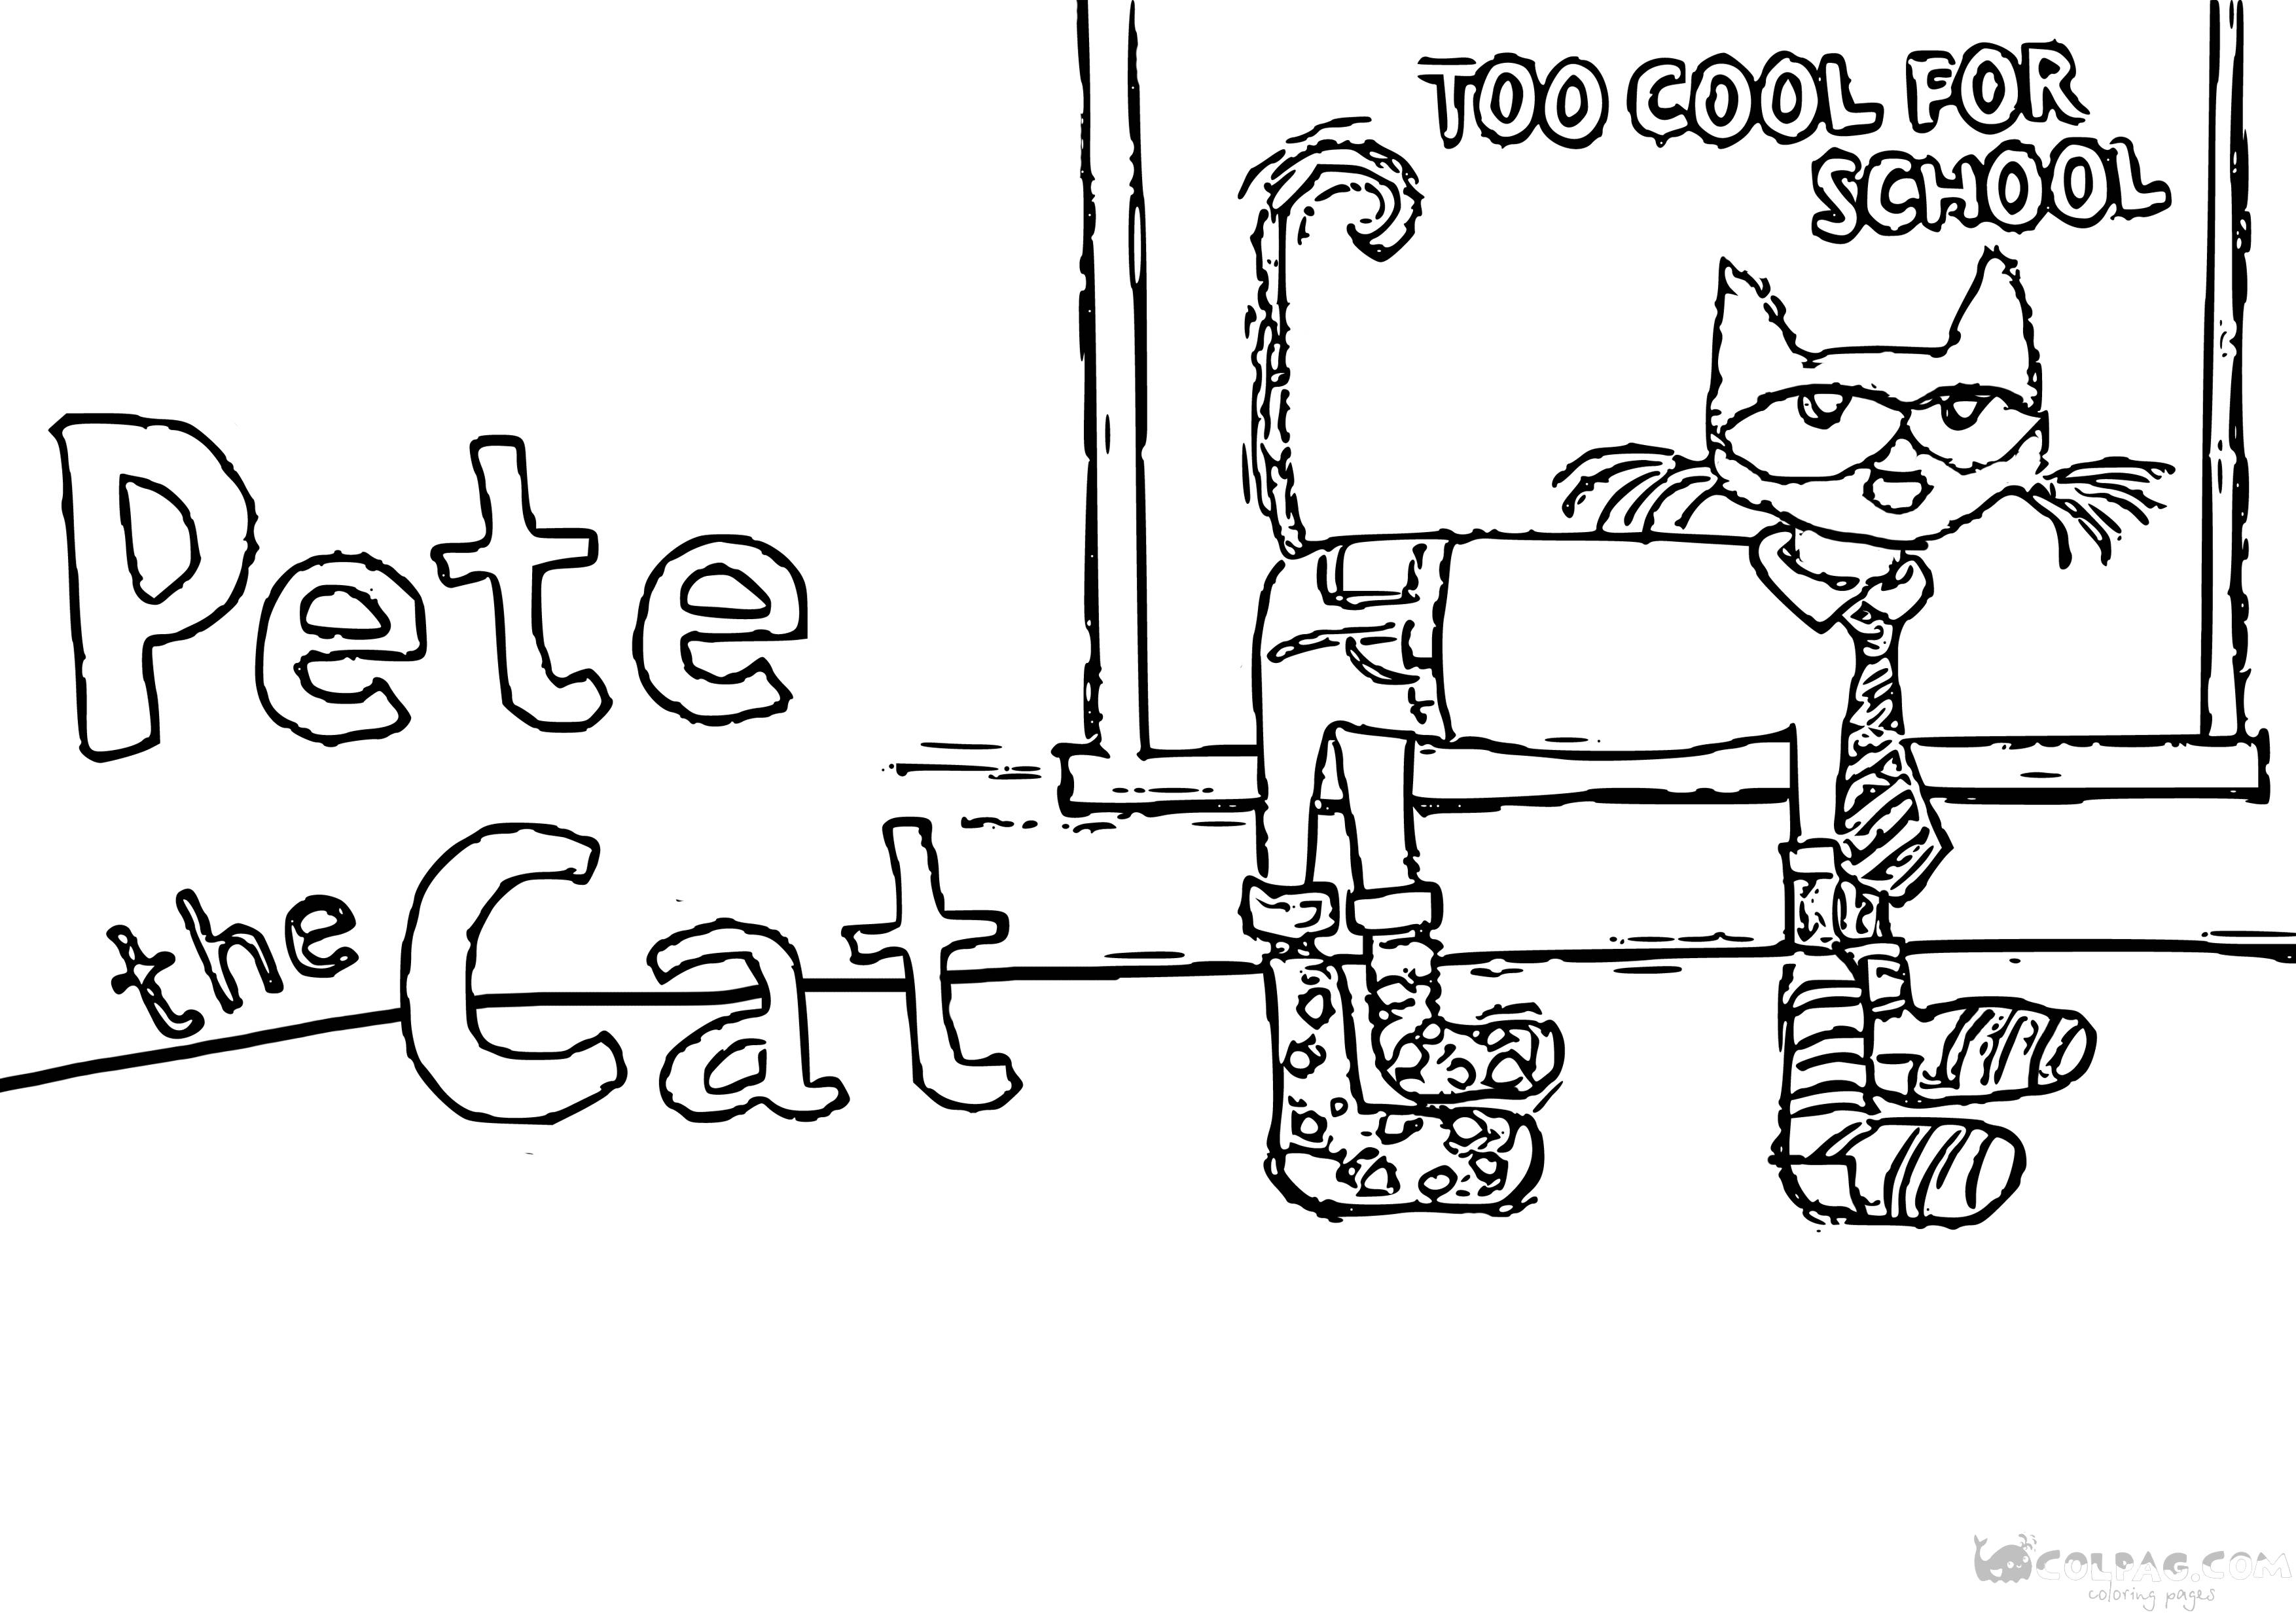 pete-the-cat-coloting-page-39-colpag